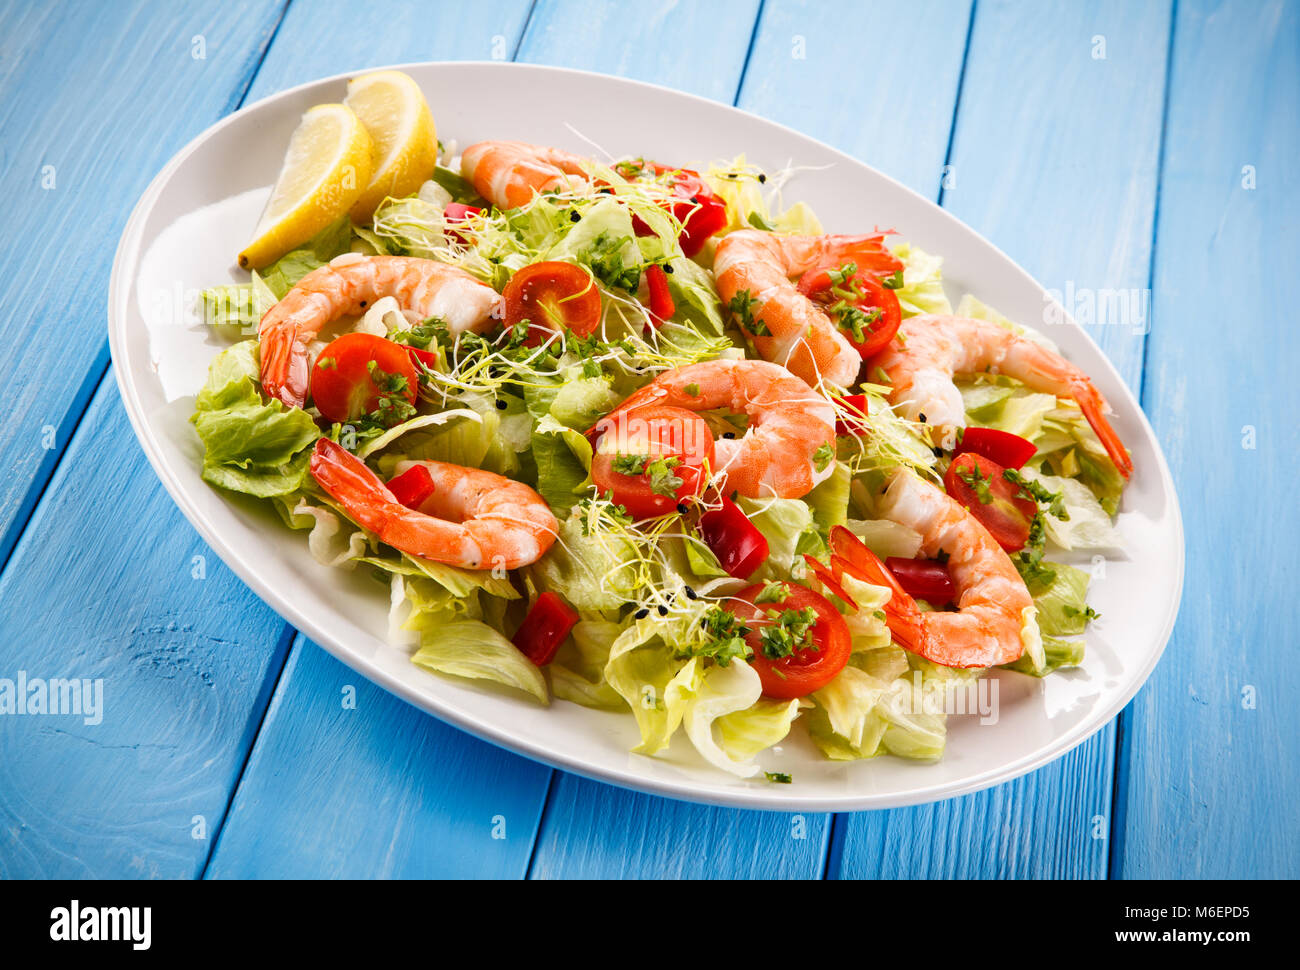 Salad with shrimps on wooden table Stock Photo